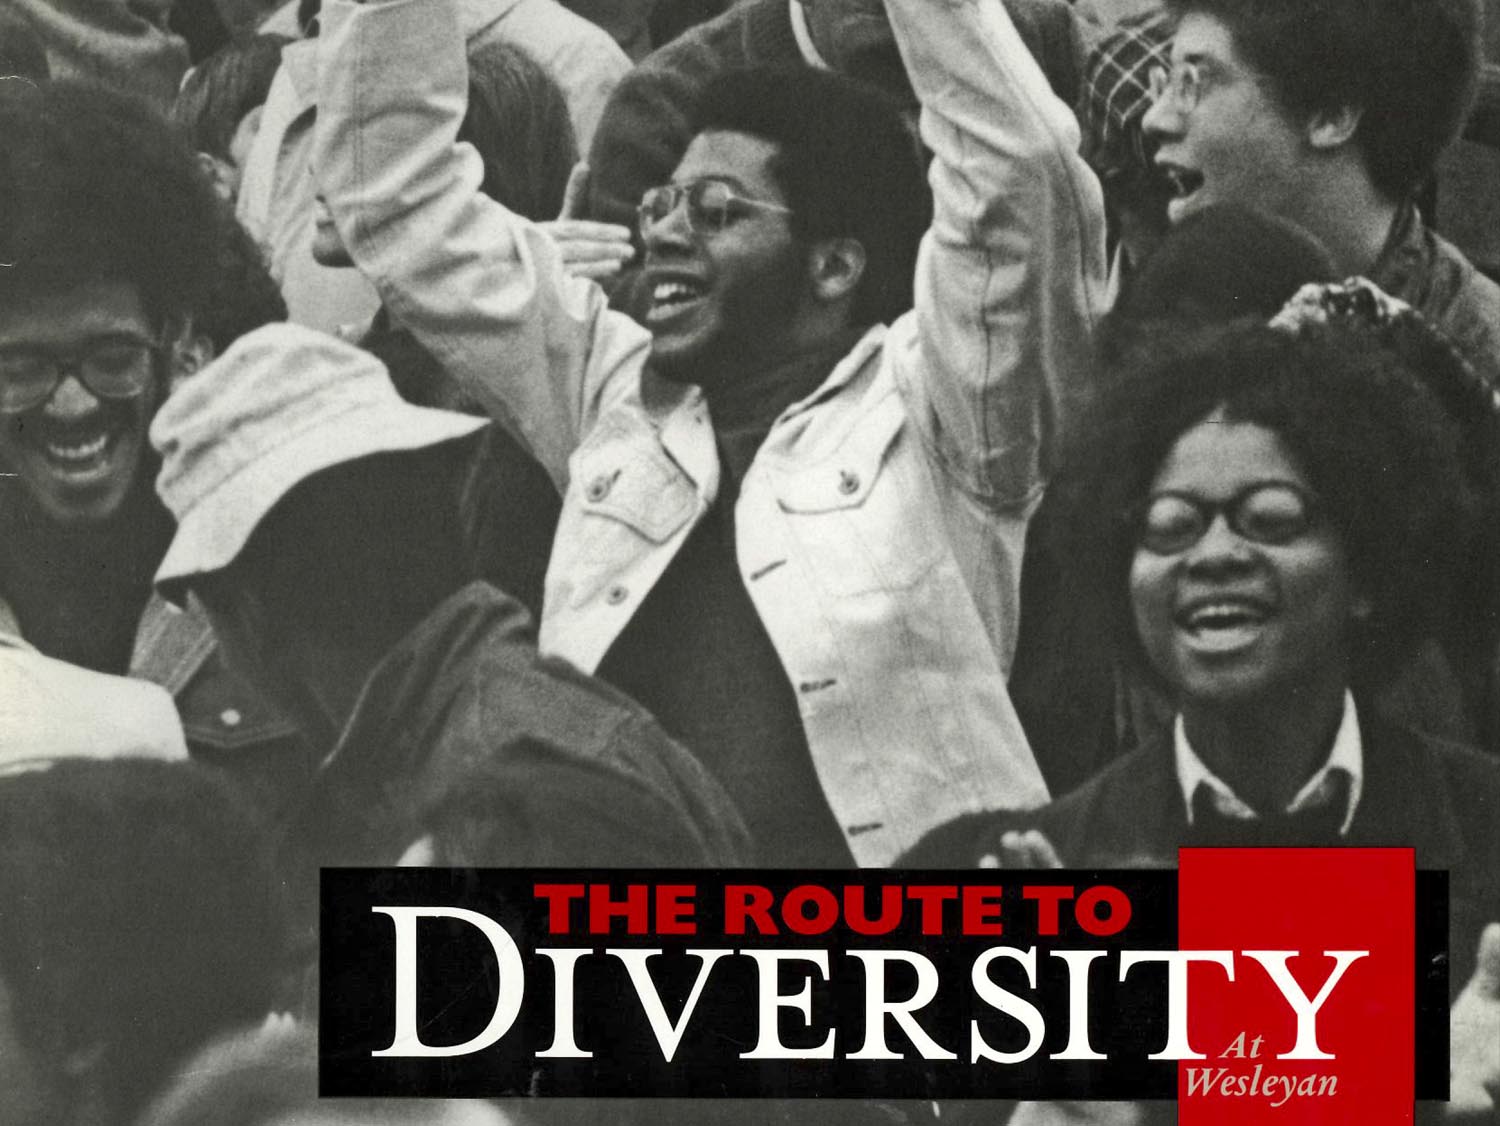 WESLEYAN MAGAZINE SUPPLEMENT: THE ROUTE TO DIVERSITY